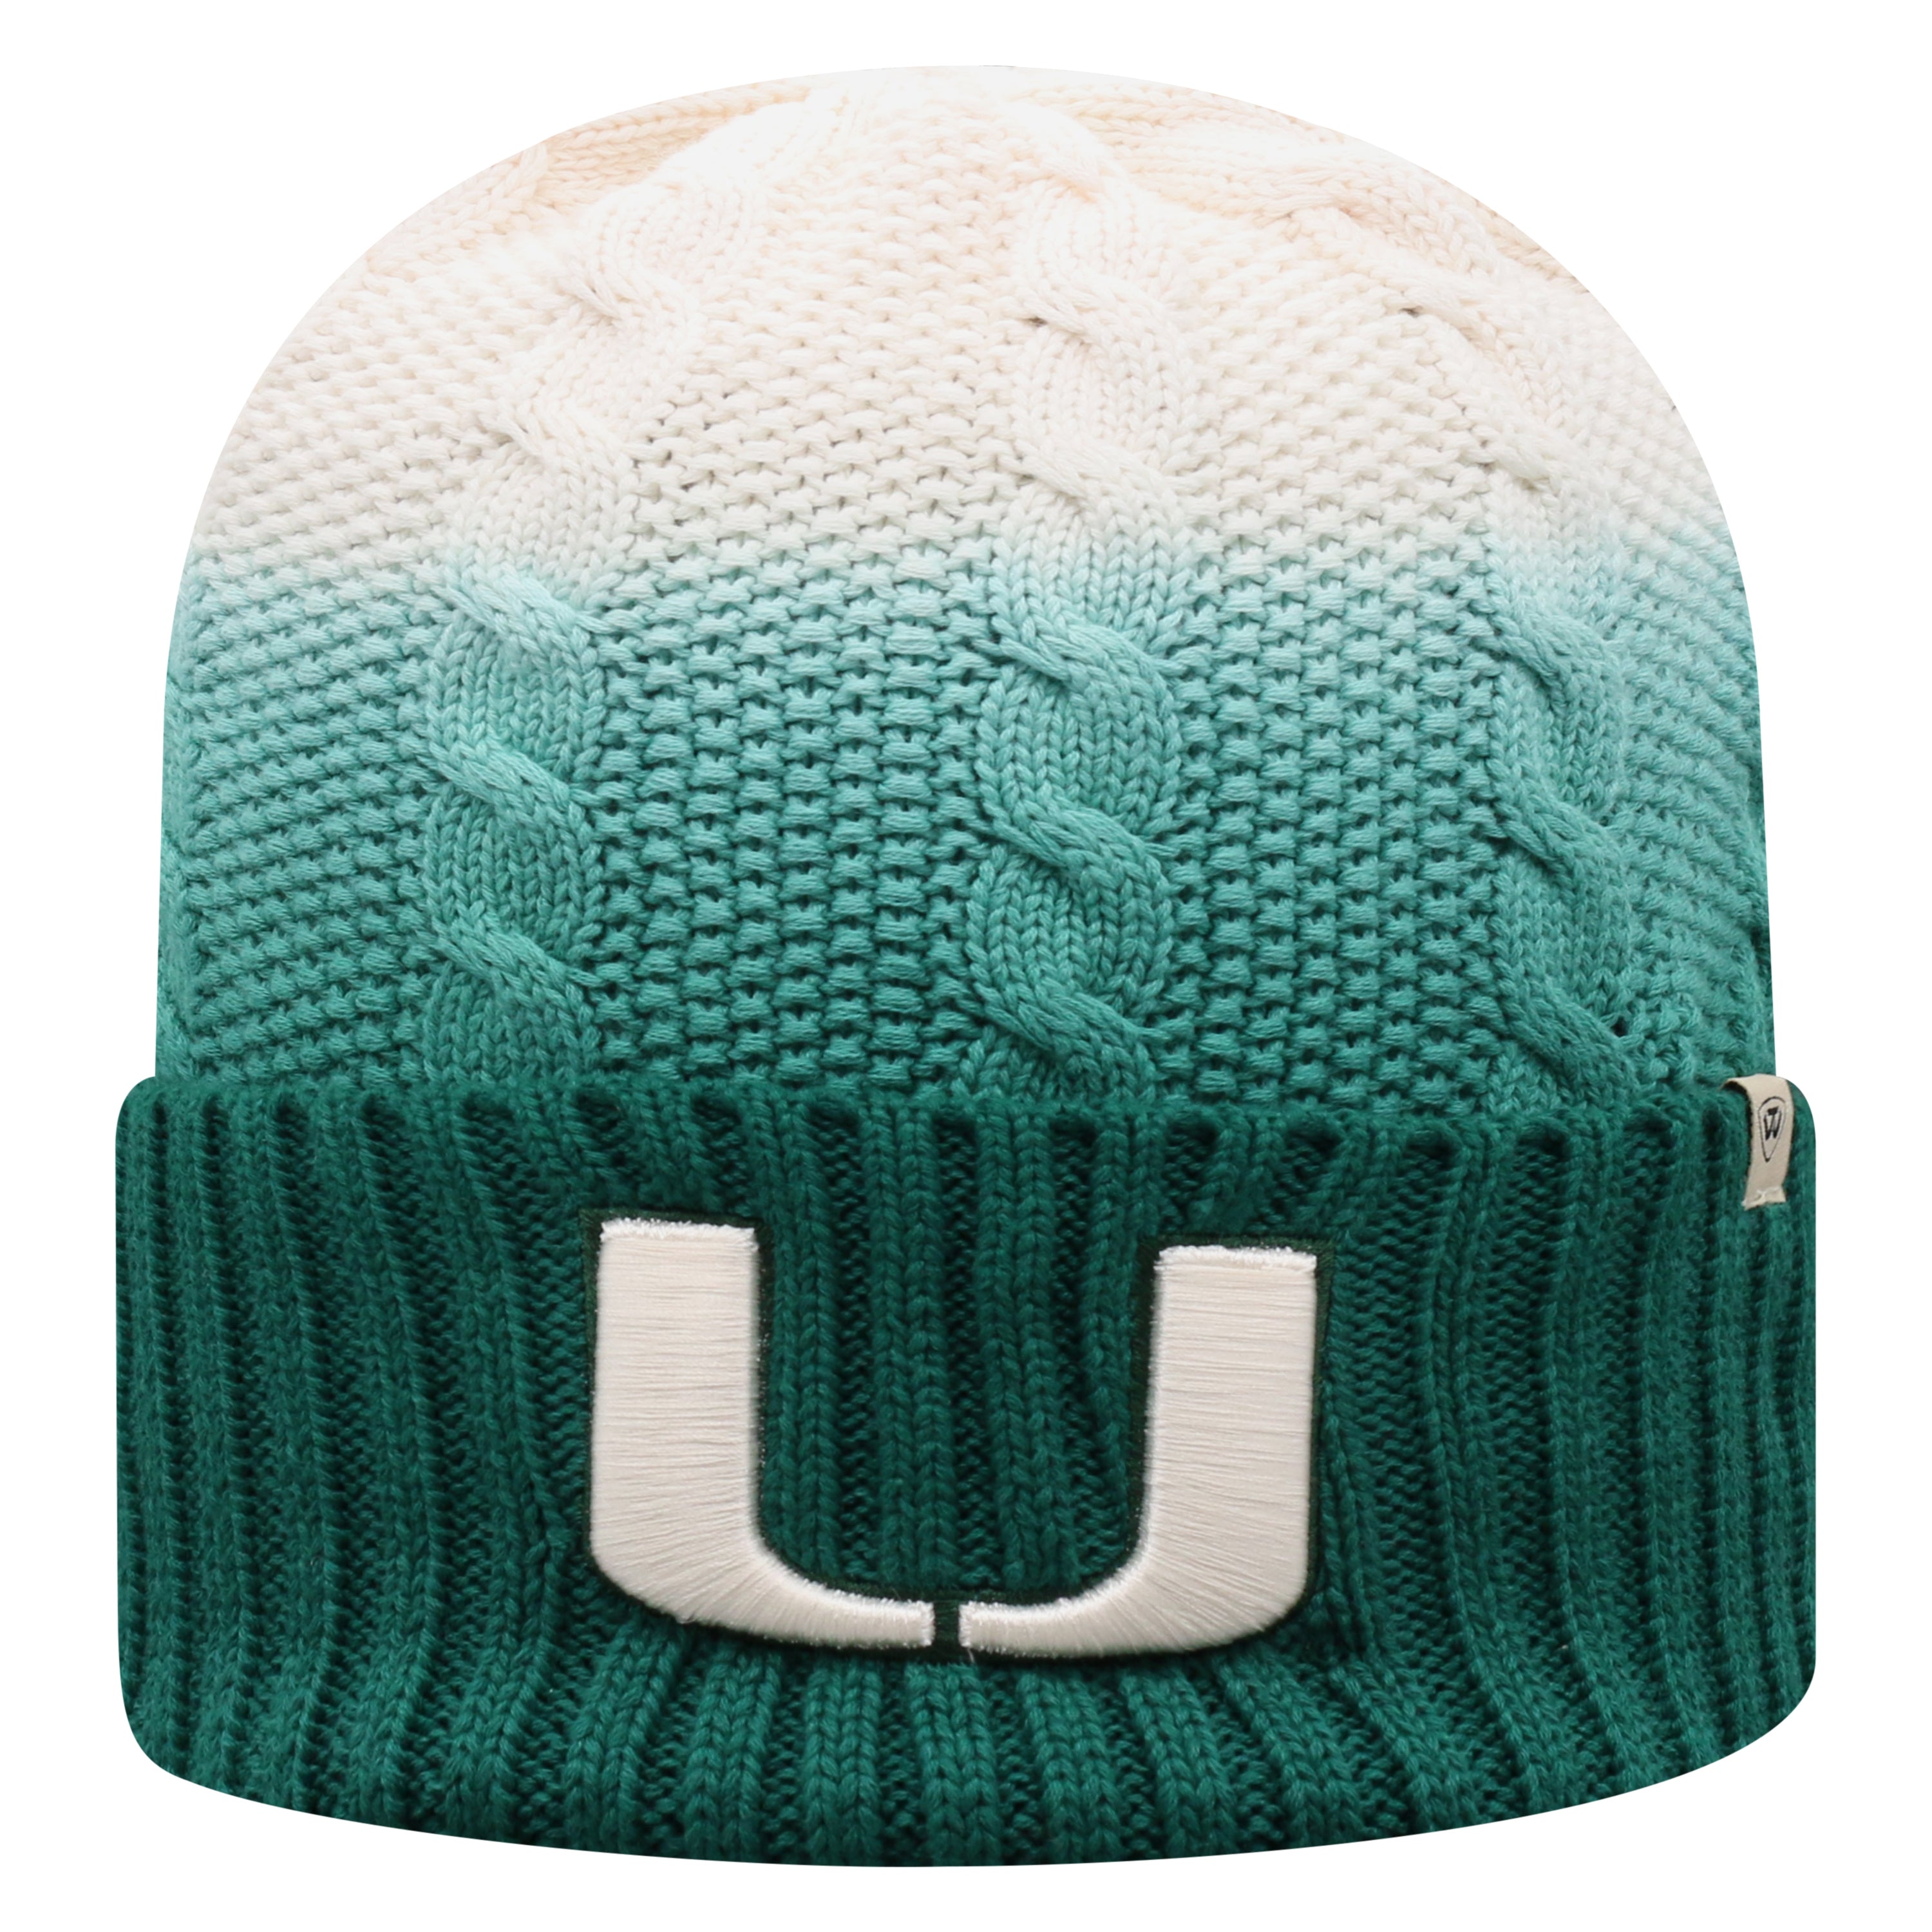 Miami Hurricanes Top of the World Dissolve Cuffed Knit - Green/White